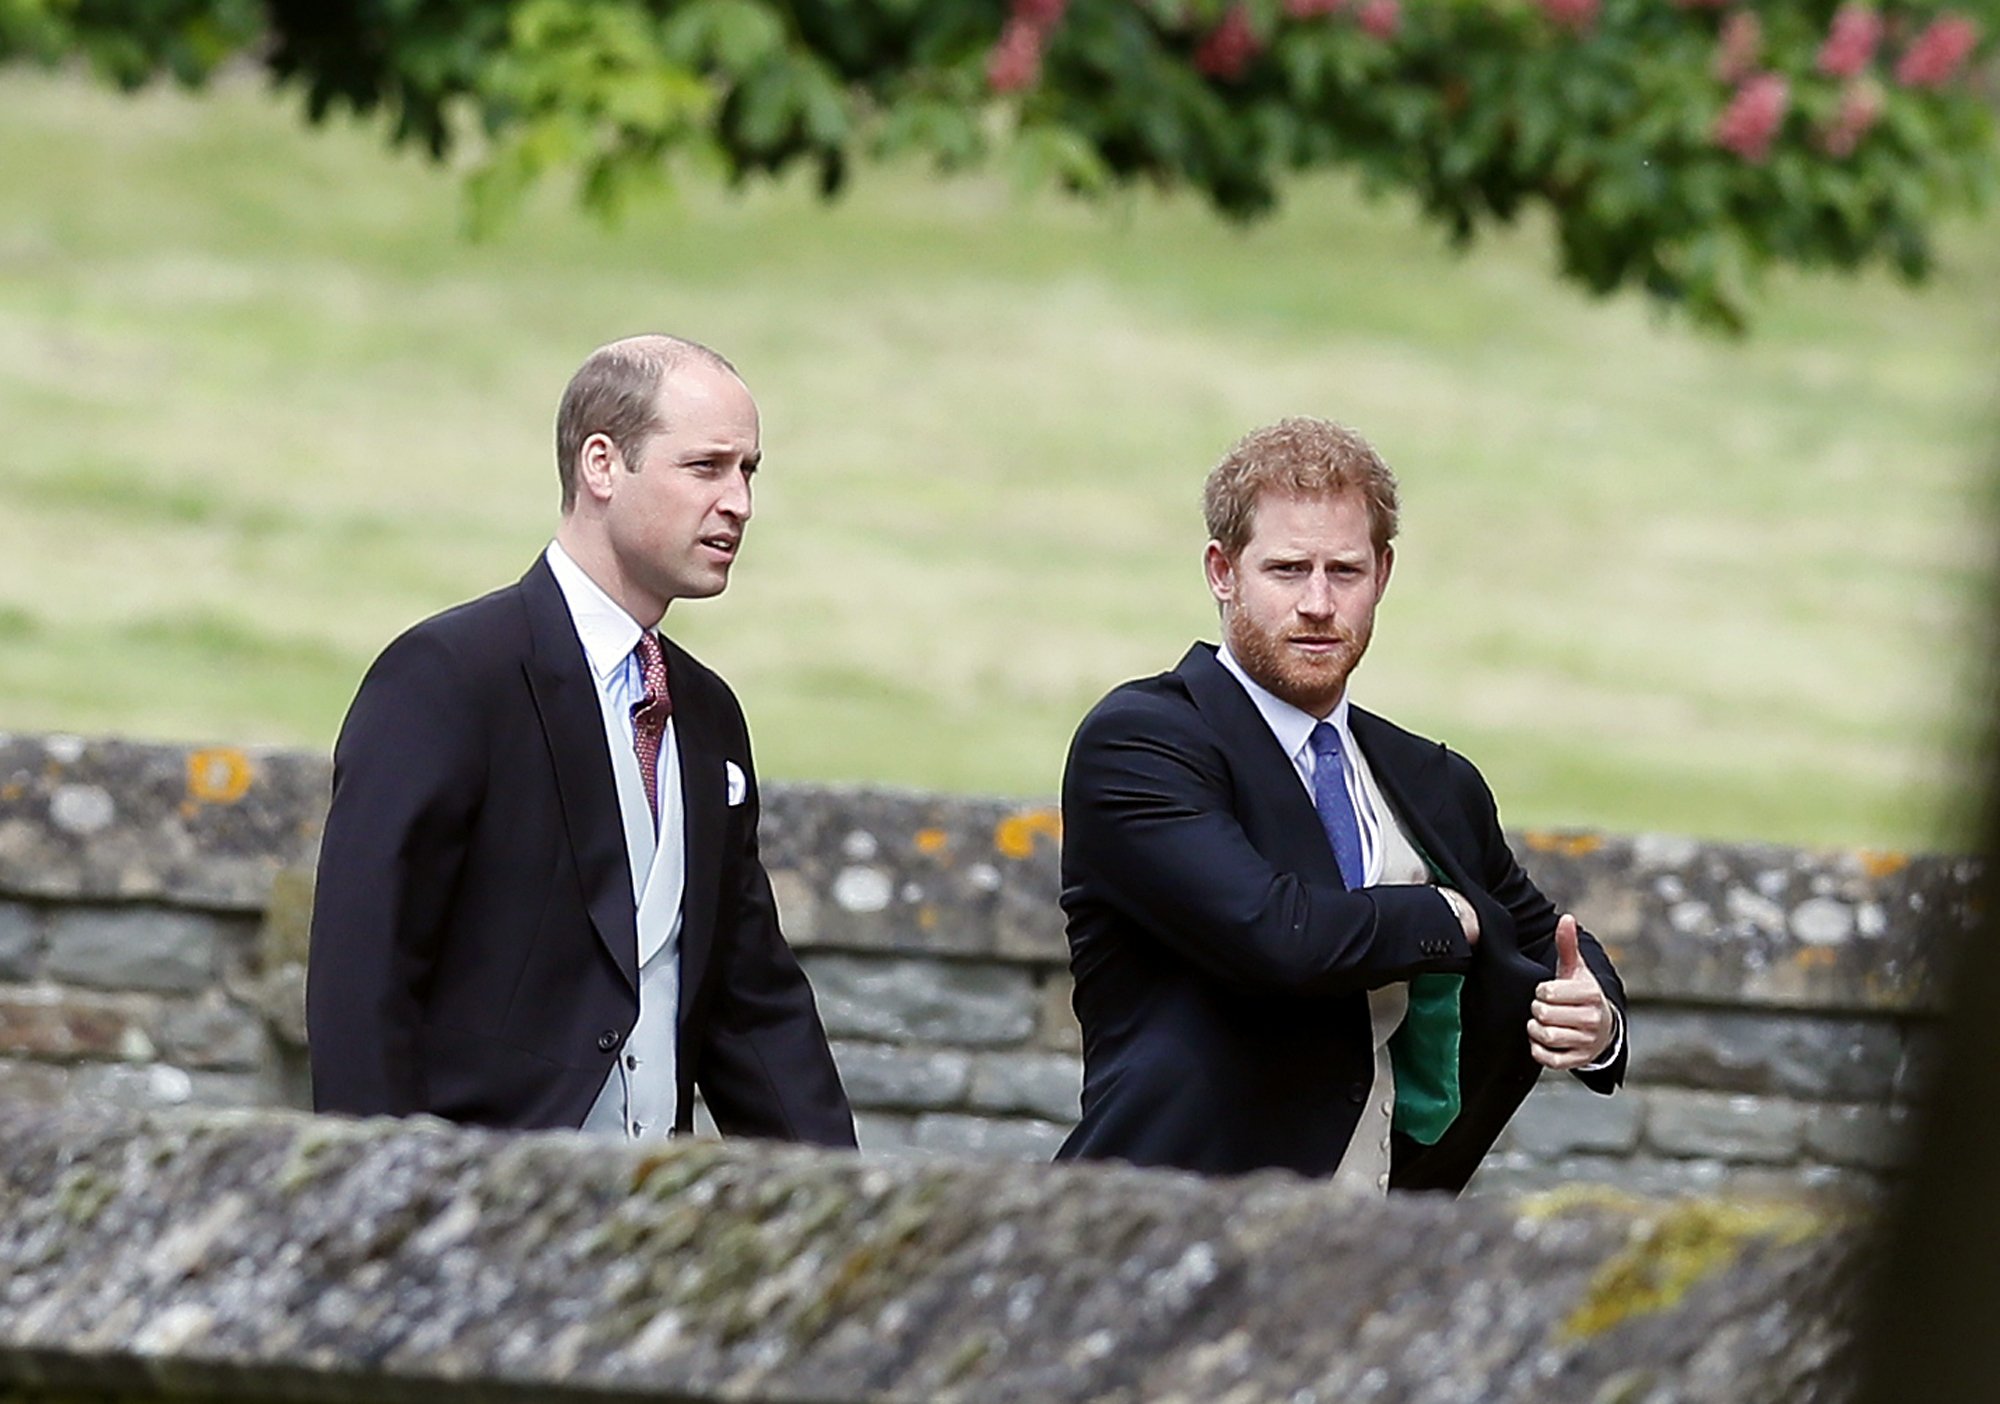 Britain's Prince William and his brother Prince Harry arrive for the wedding of Pippa Middleton and James Matthews at St Mark's Church on May 20, 2017 in Englefield Green, England